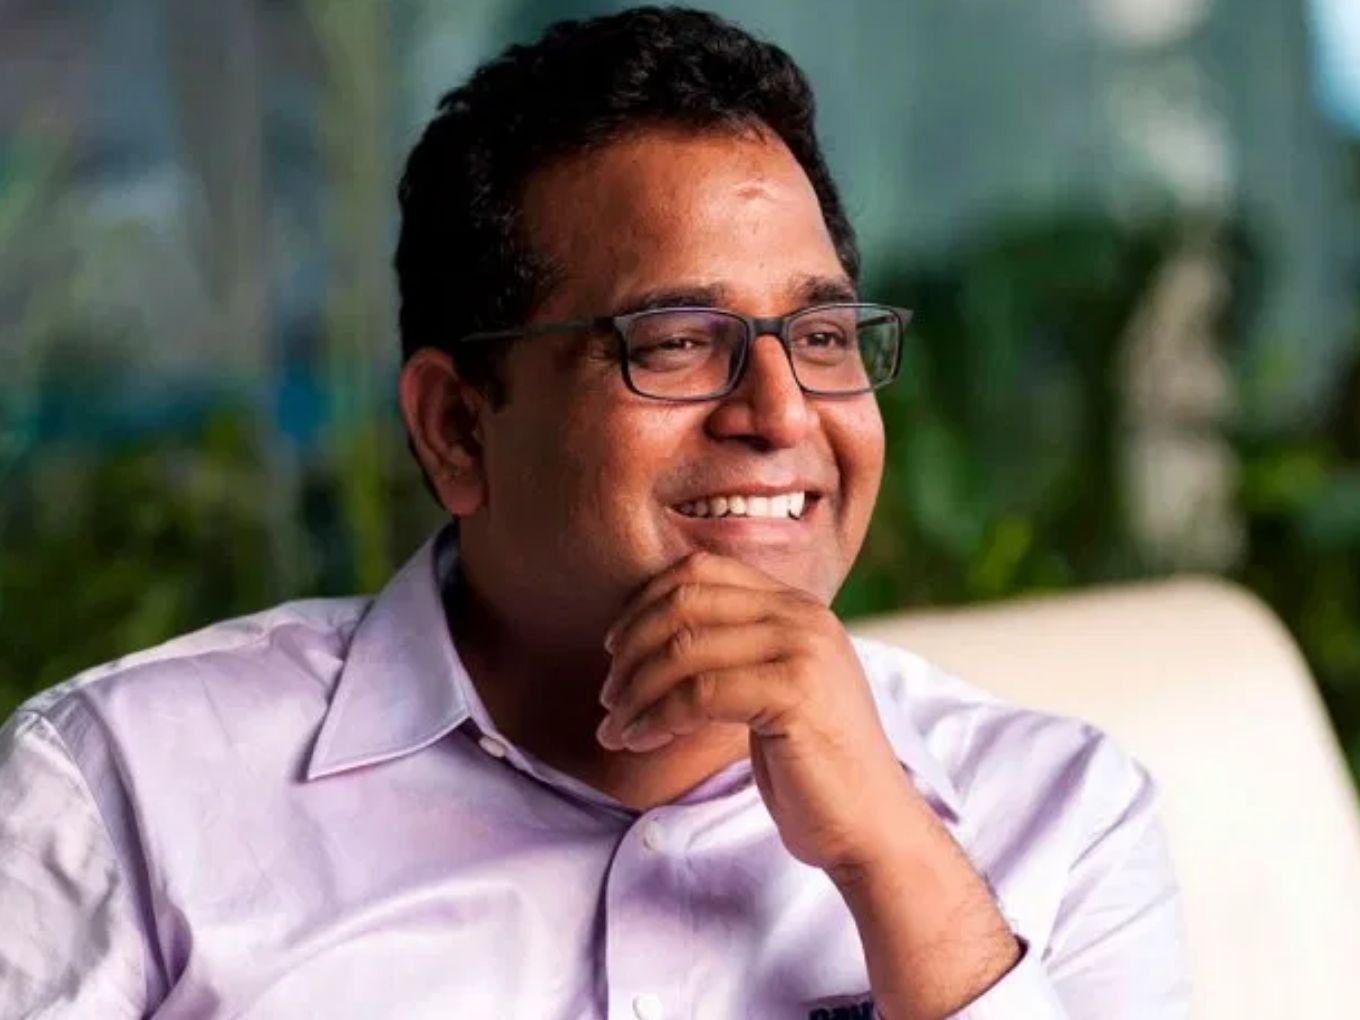 Paytm fraud: Don't Trust Any Account Blocking, KYC SMS: Paytm Head Warns Its Users